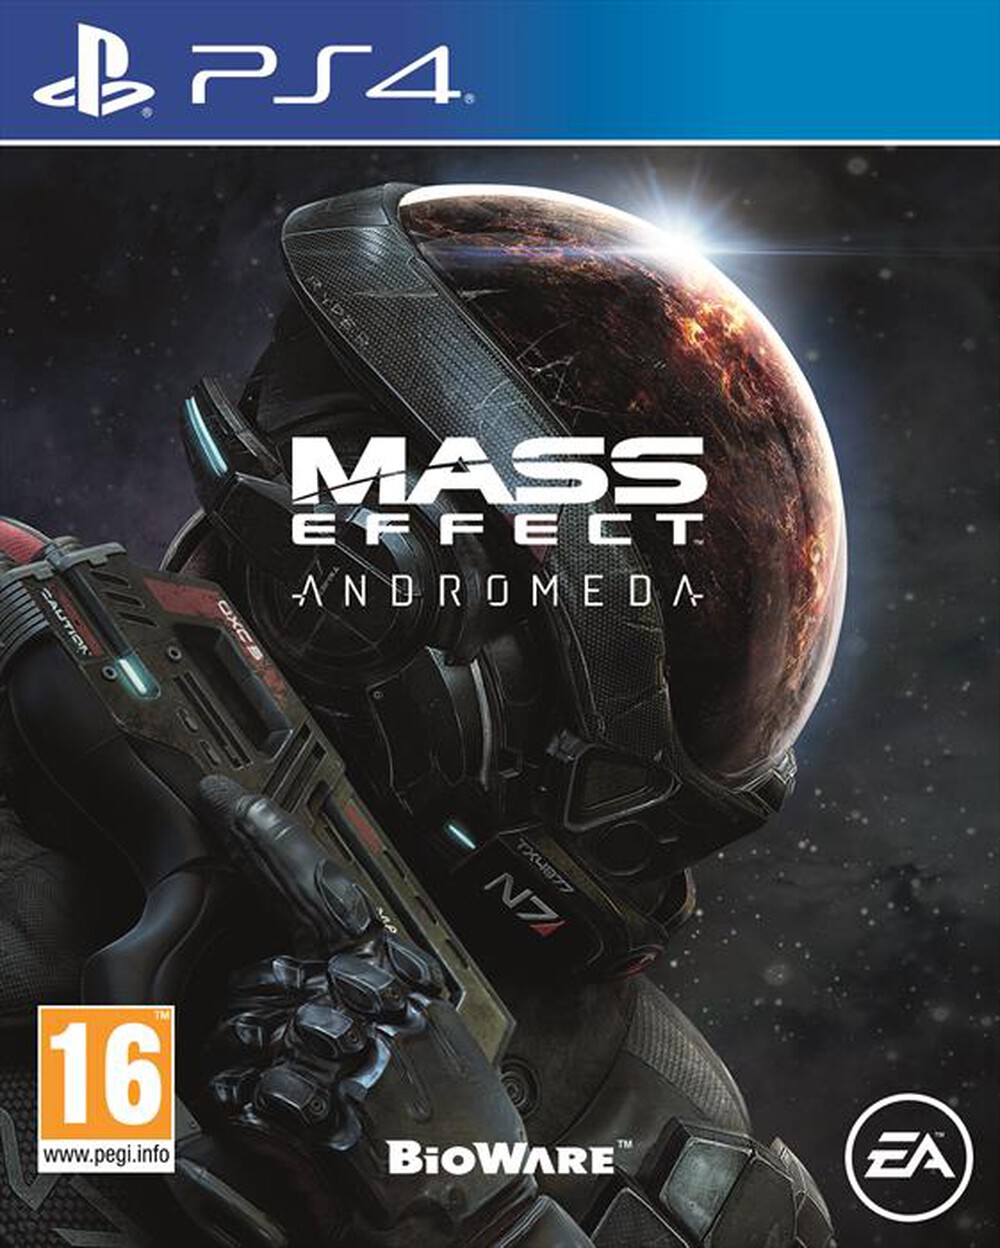 "ELECTRONIC ARTS - Mass Effect Andromeda PS4 - "